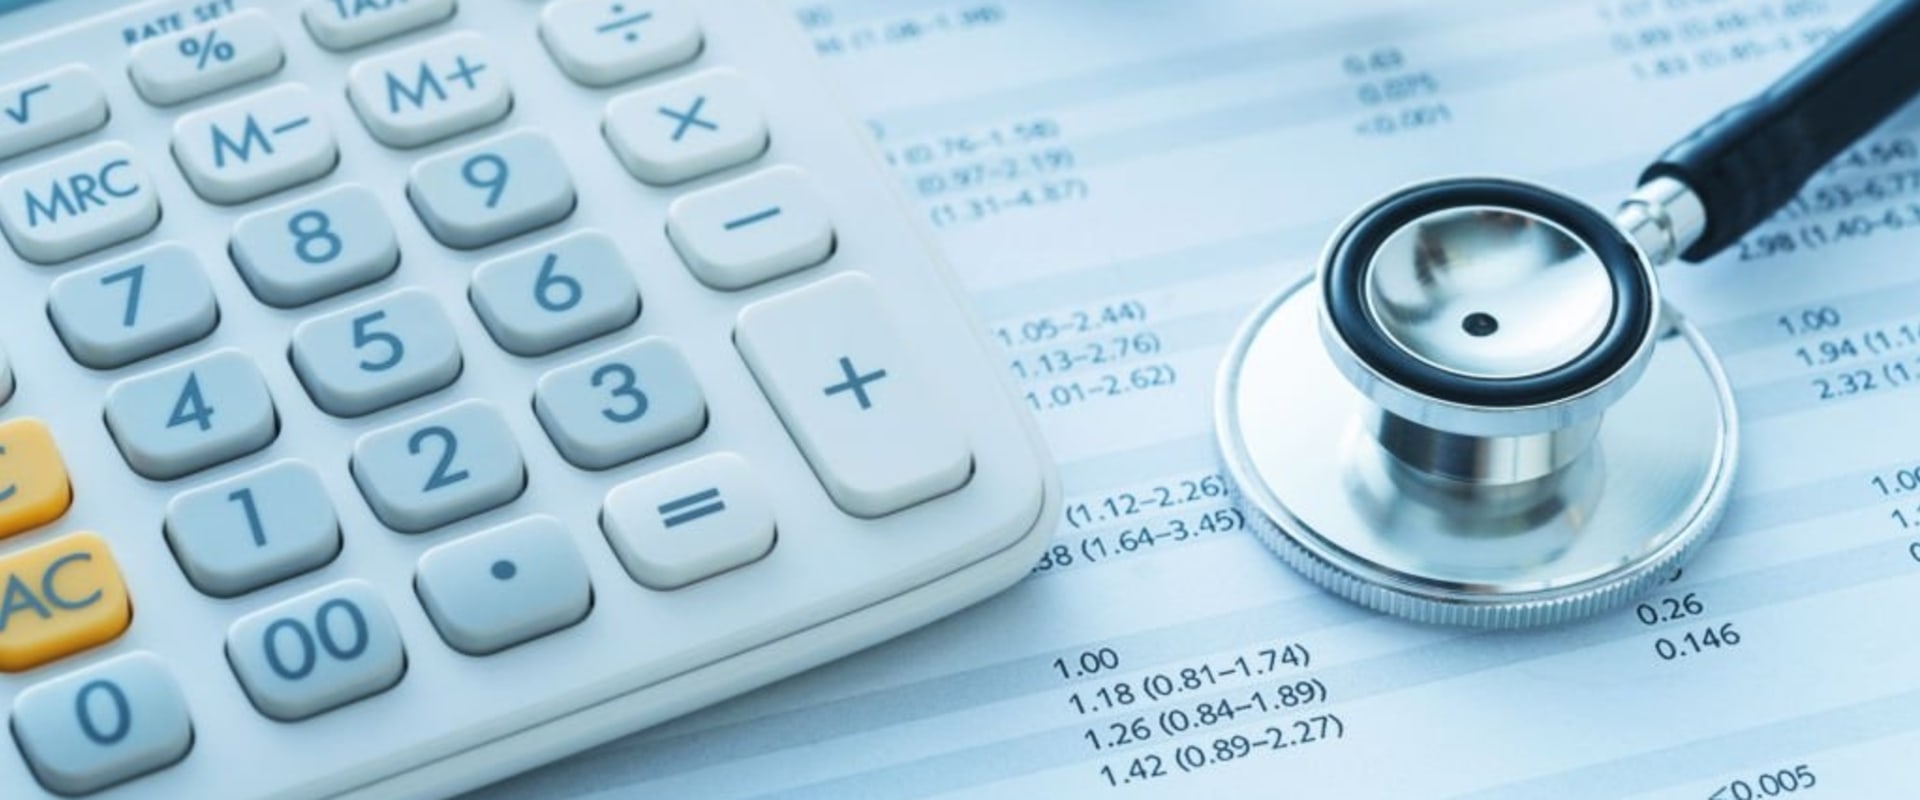 Can i deduct health insurance premiums on 1040?